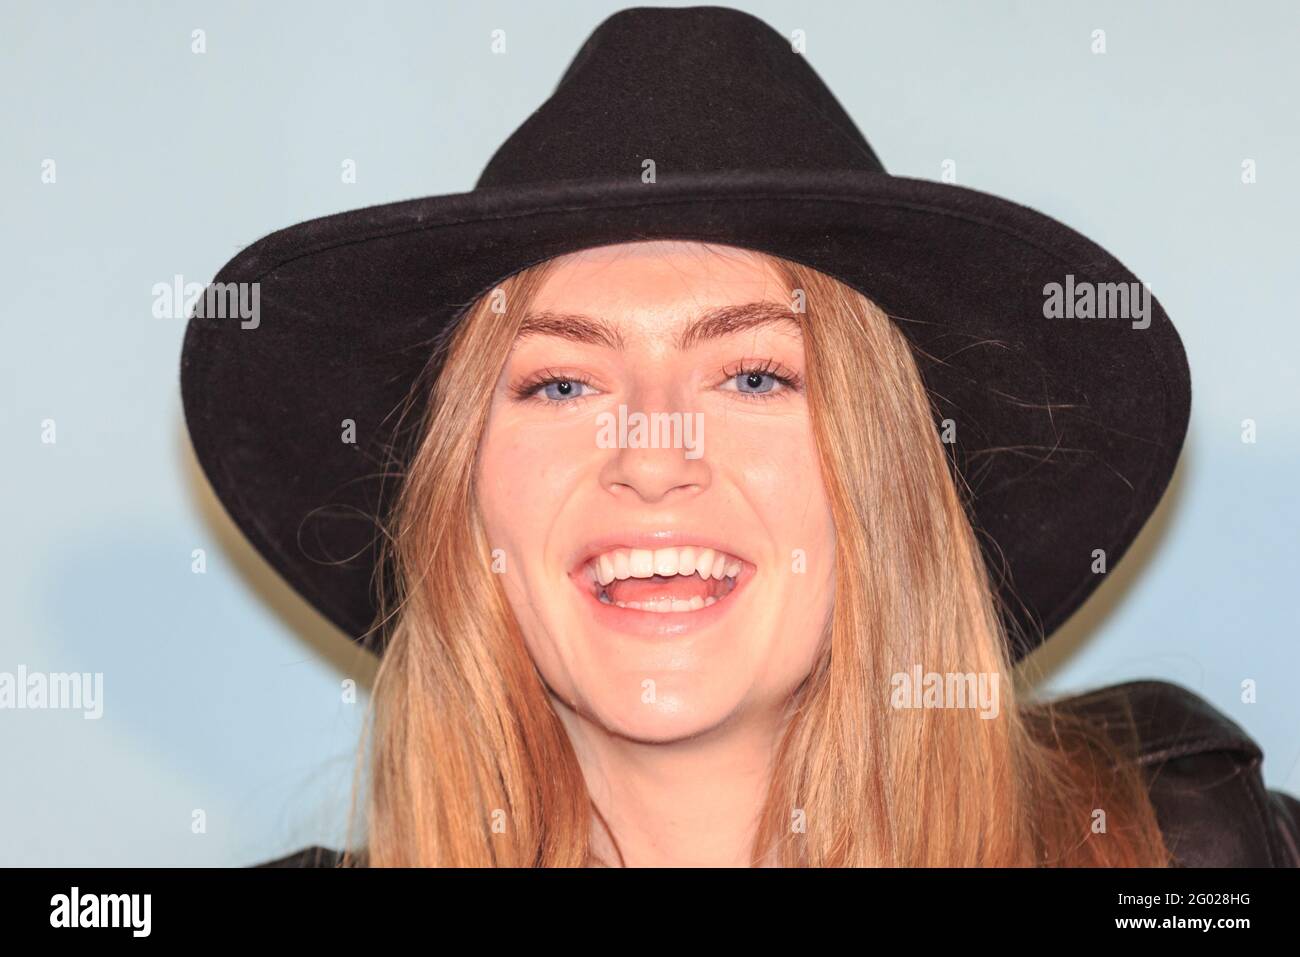 Model Eve Delf attends SKATE at Somerset House event, close up portrait, smiling, London, UK Stock Photo